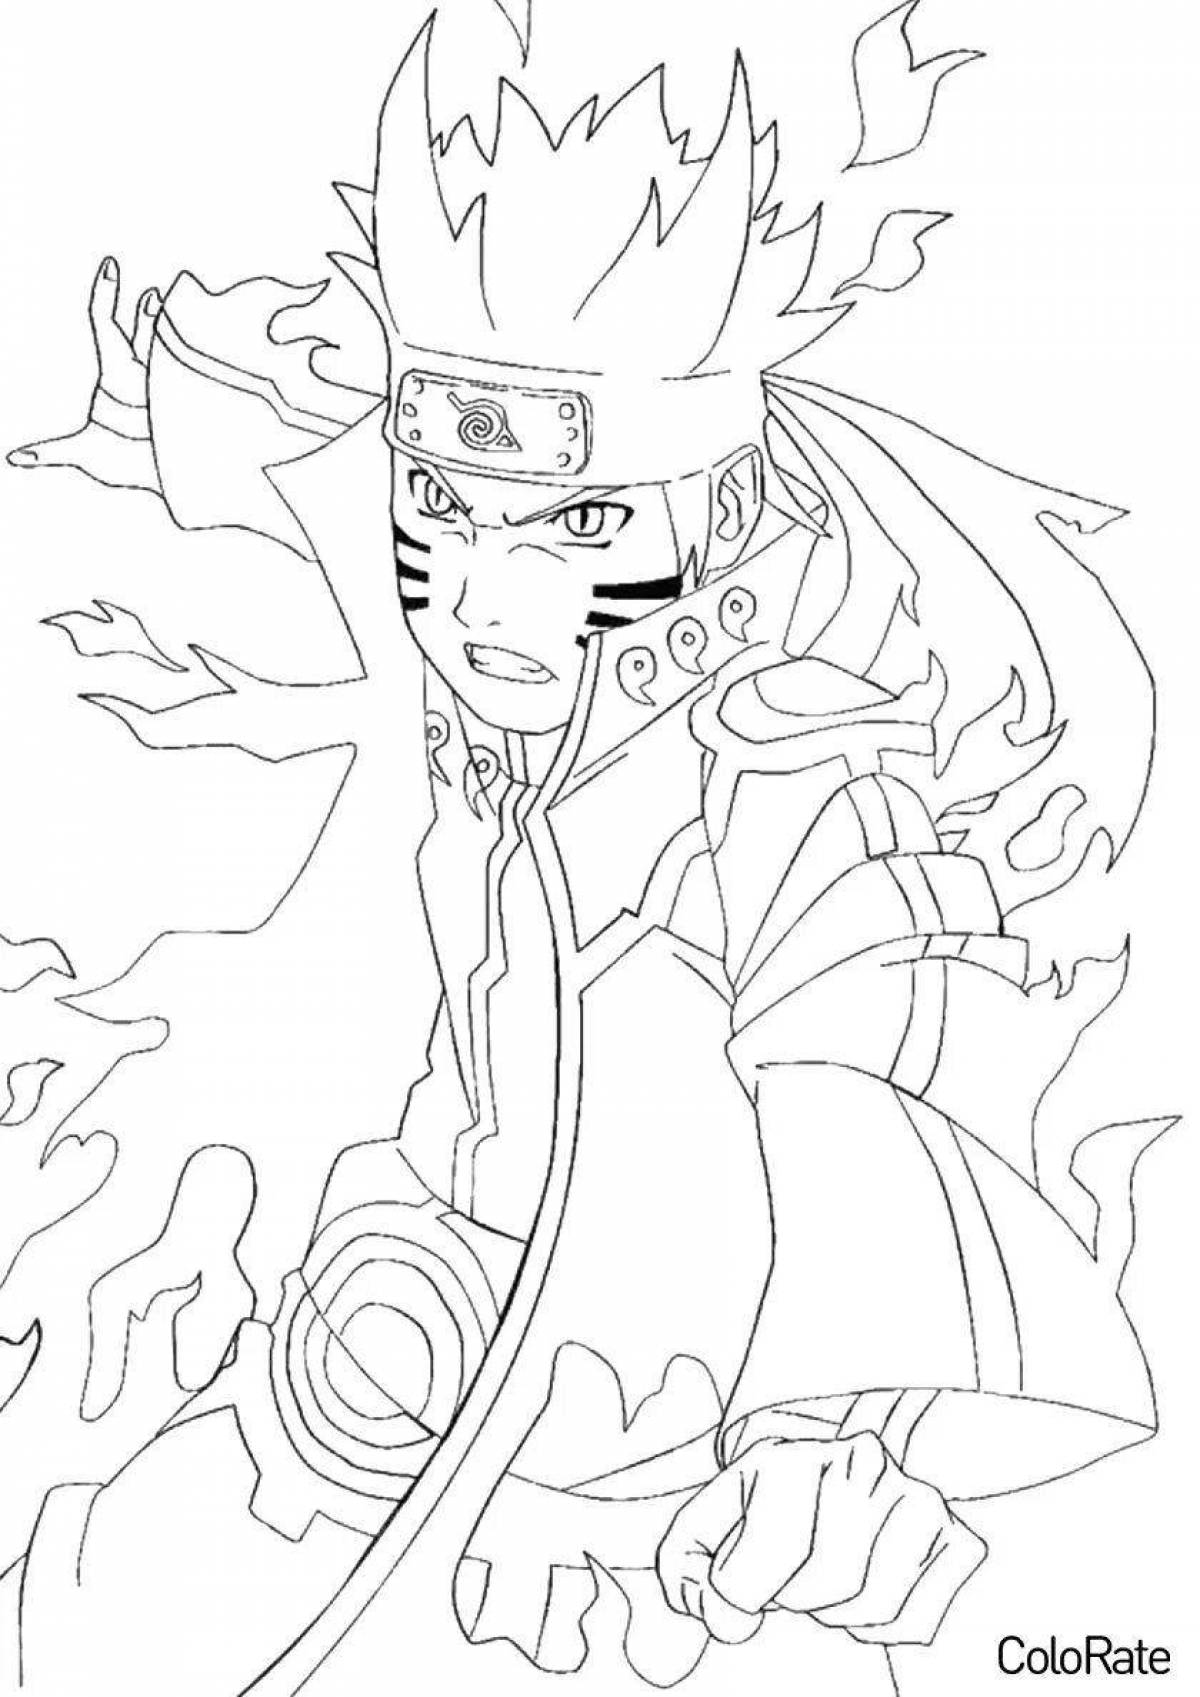 Awesome naruto coloring game